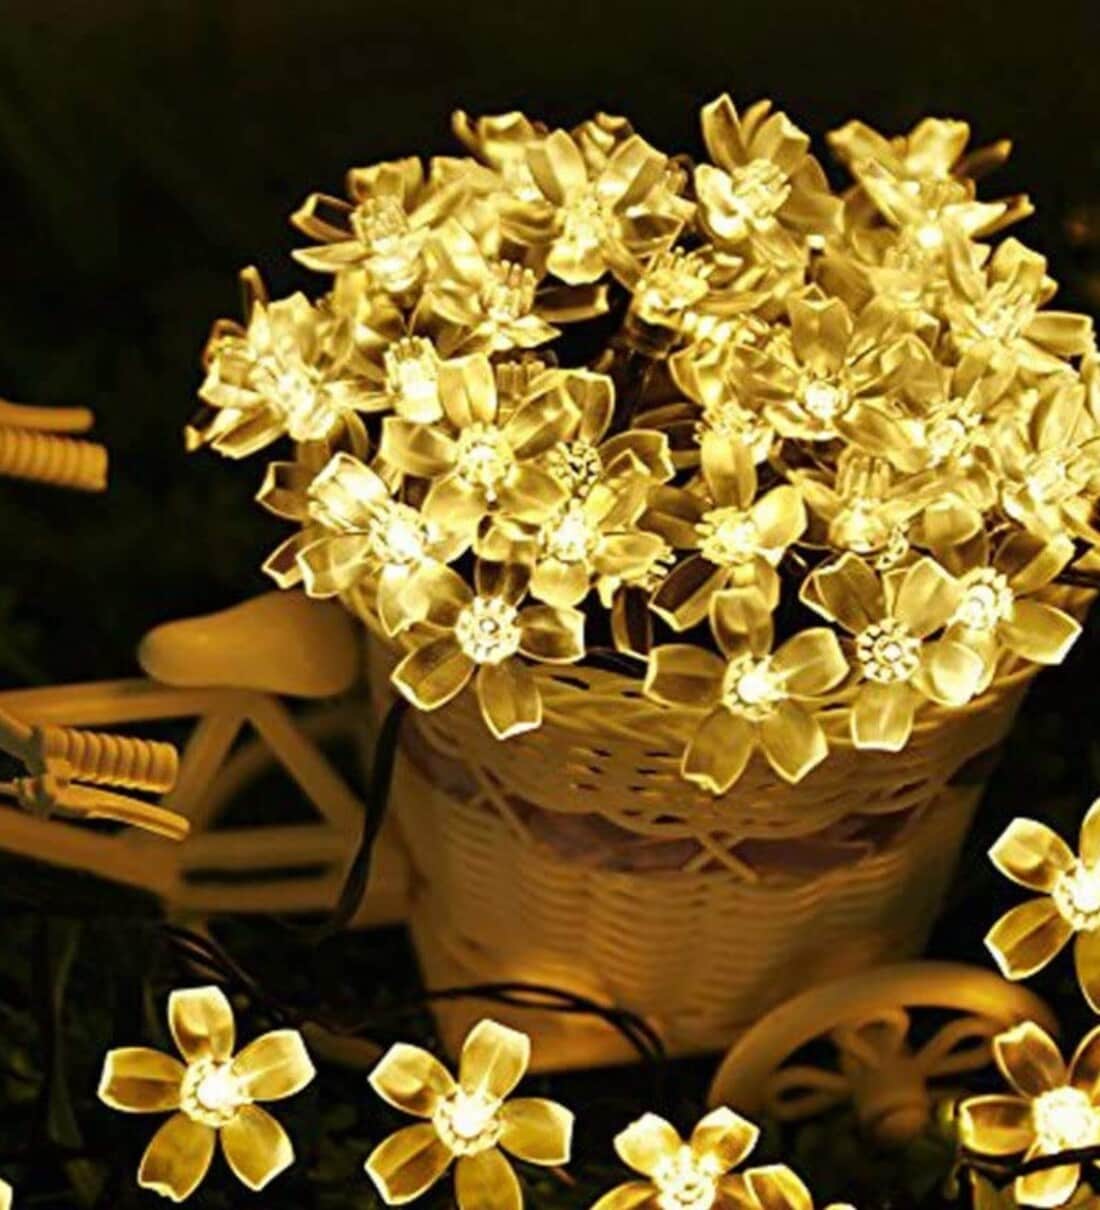 Silicon Flowers 7 Mtrs (20 LEDs) Direct Plug-in LED String LightShare By Mansaa